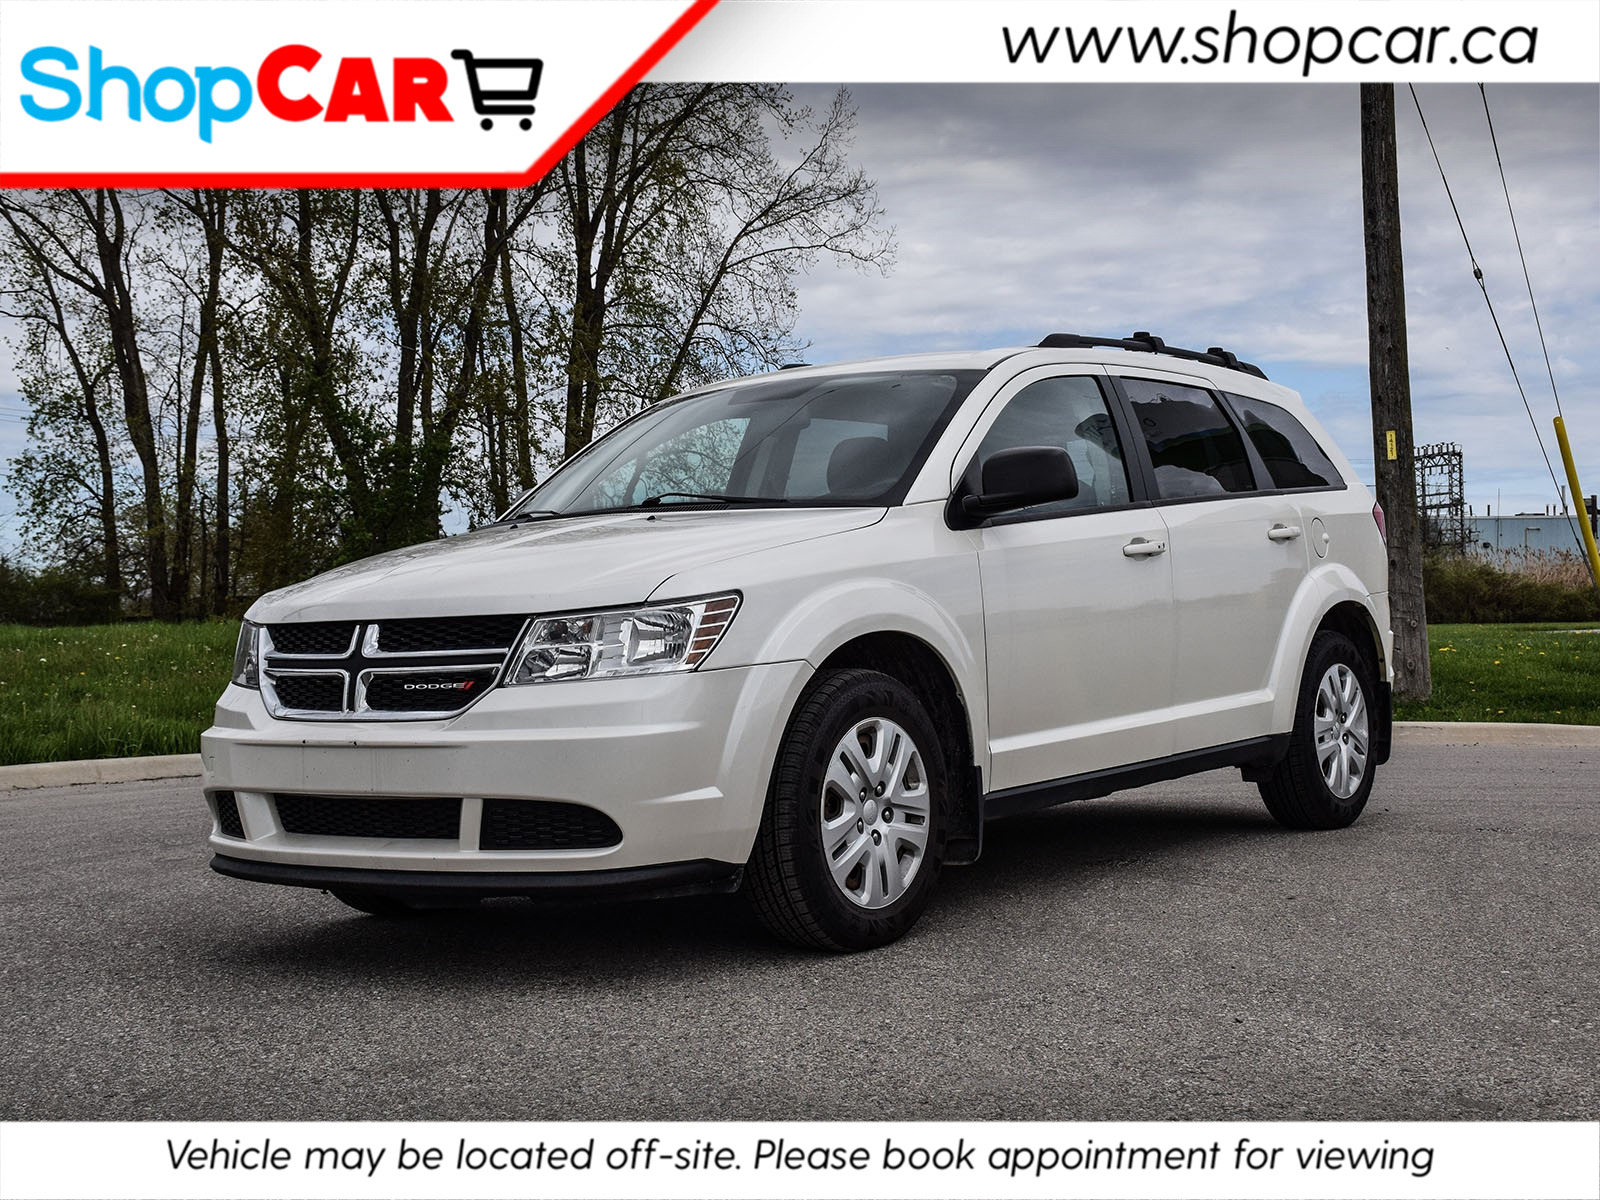 2016 Dodge Journey New Arrival | Low KMs | No Accidents